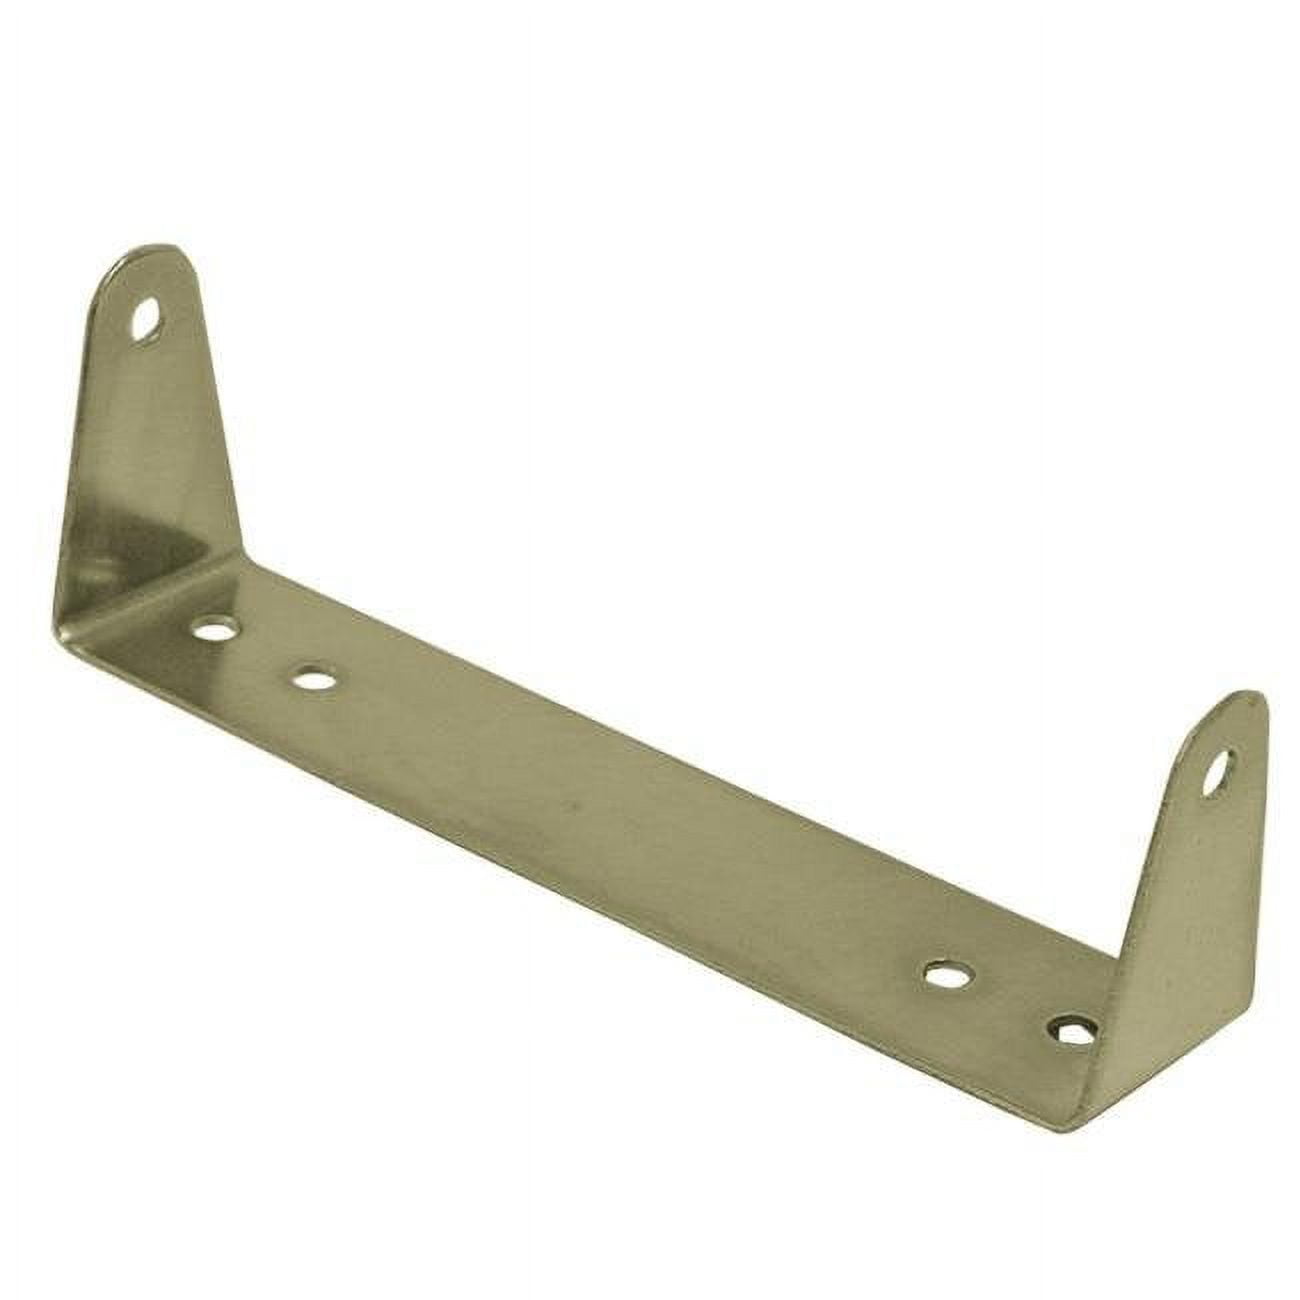 Picture of Accessories Unlimited AU65 6.5 in. Brass Finish Single Hole Replacement Mounting Bracket for Cobra 25, Uniden PC66 & PC68